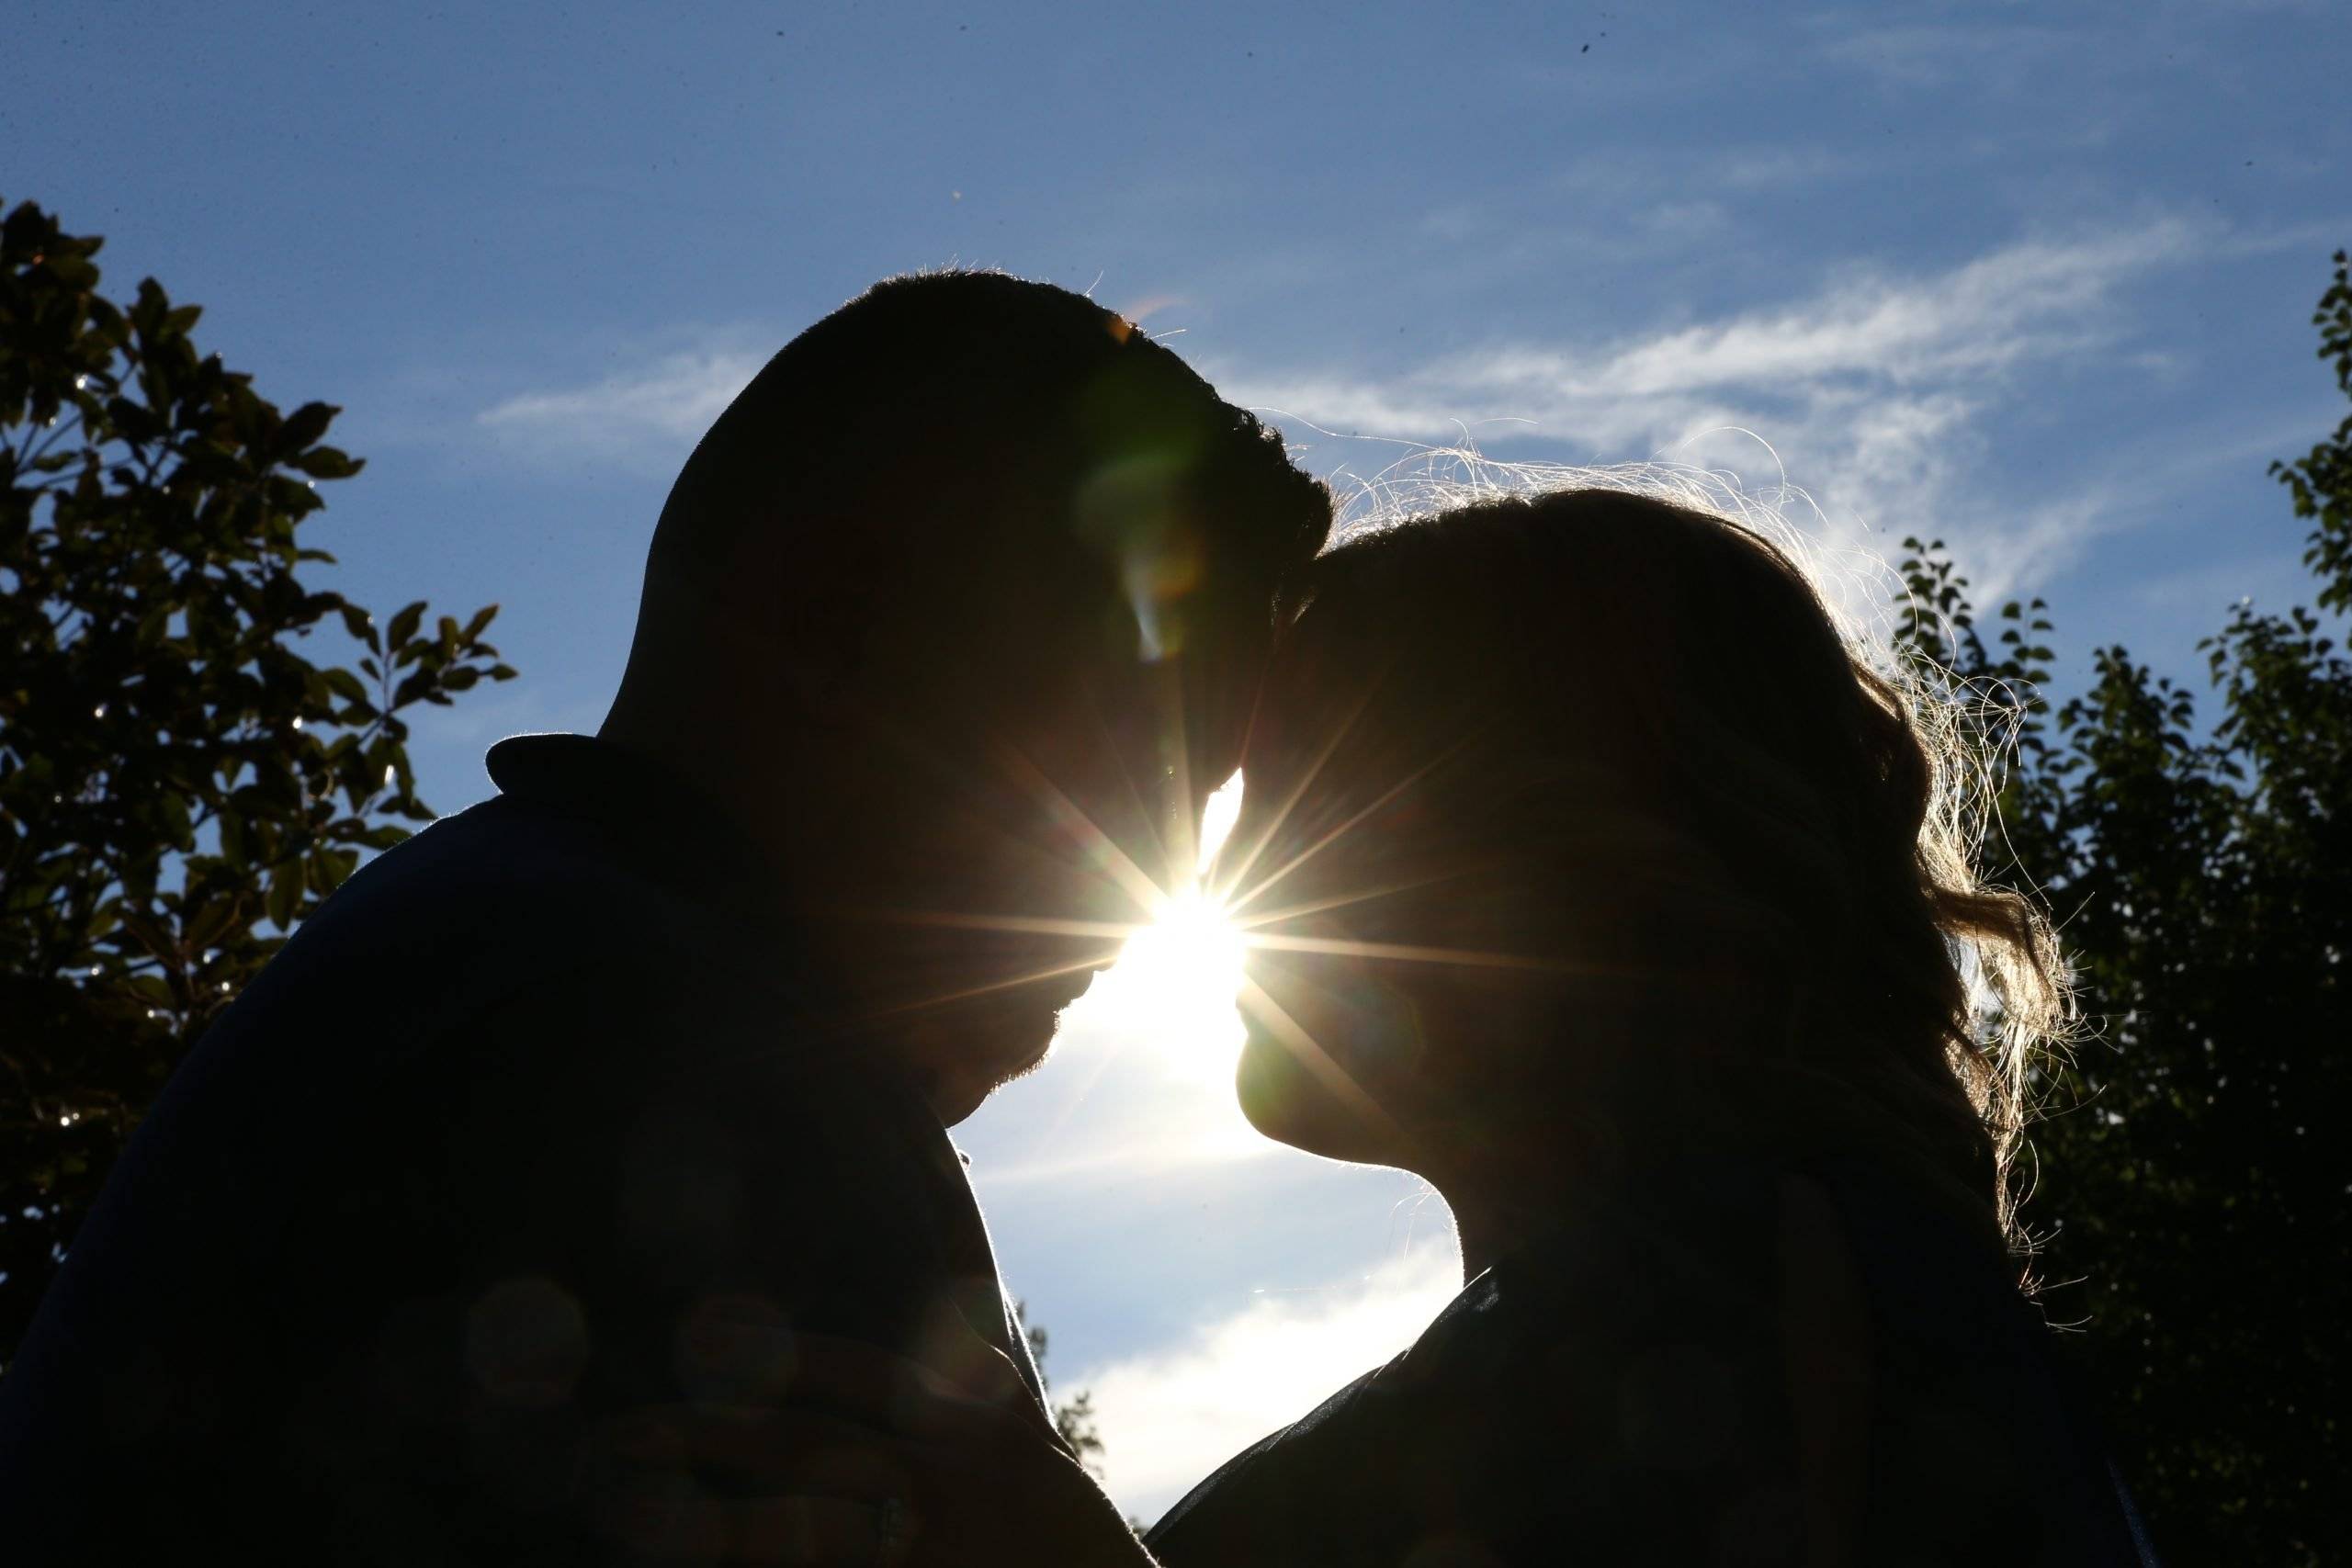 A silhouette of a couple kissing in front of the sun.